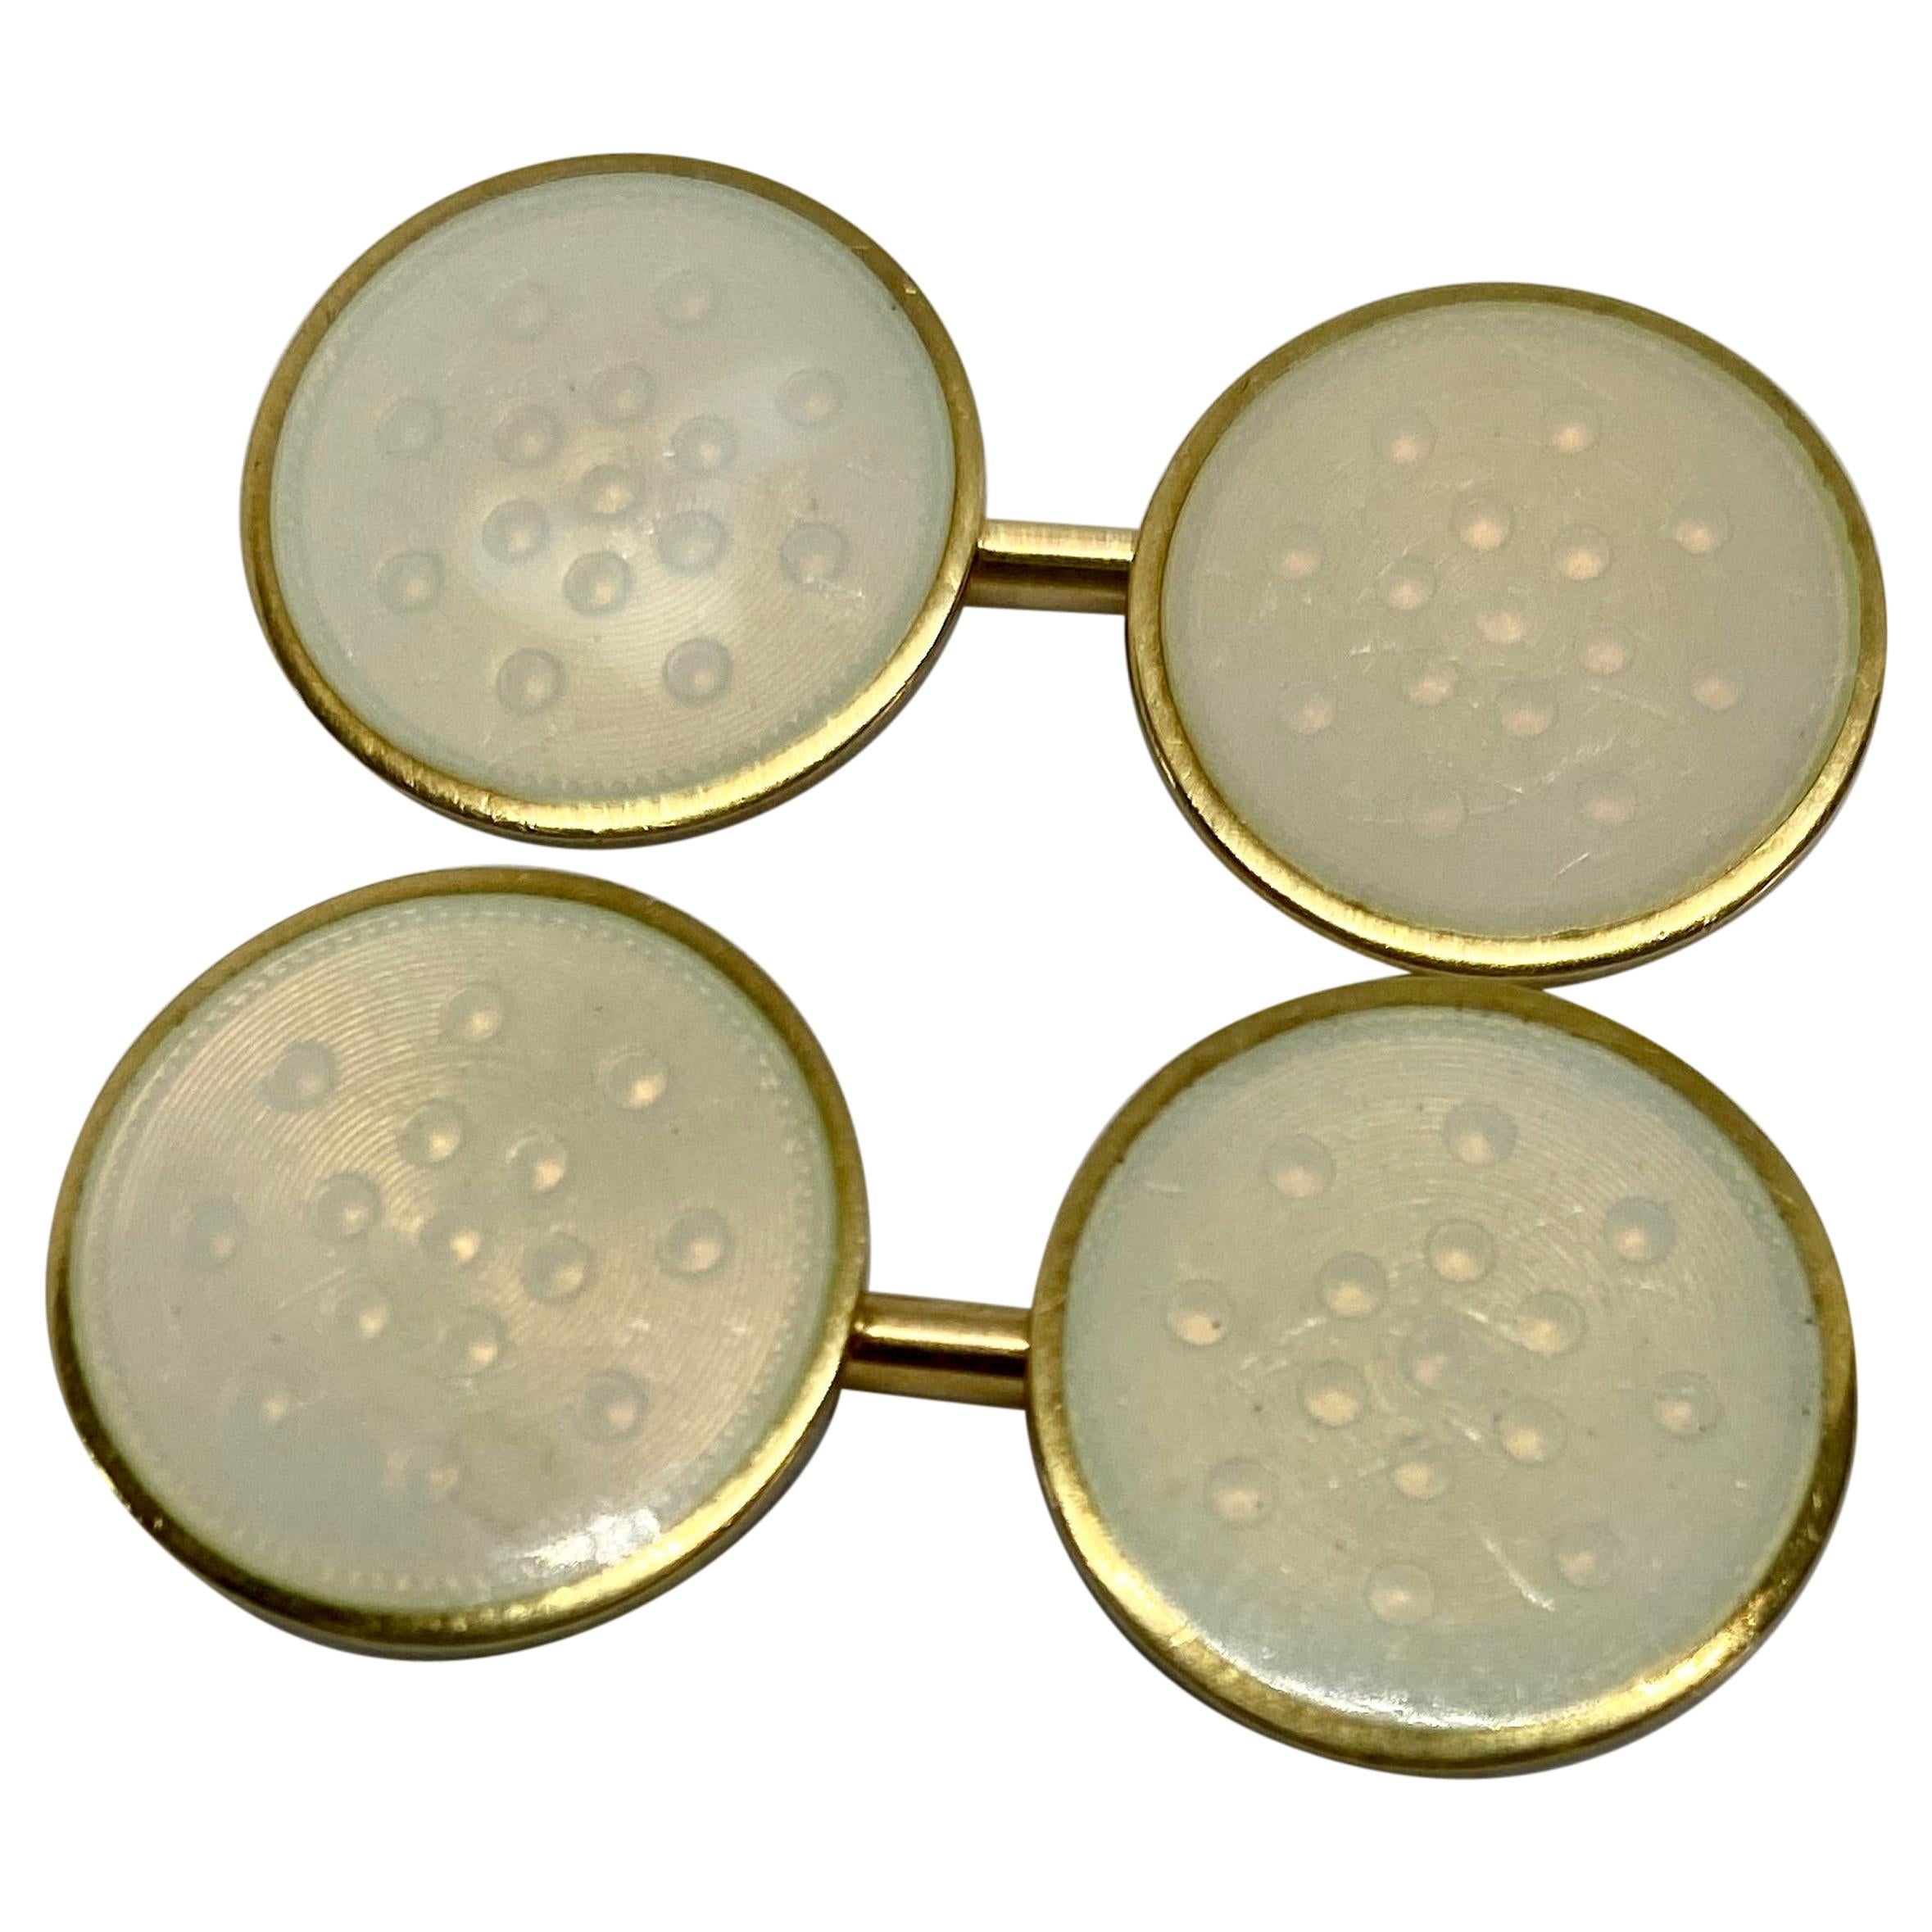 Double-Sided Cufflinks with Yellow Gold and Creme-Colored Enamel